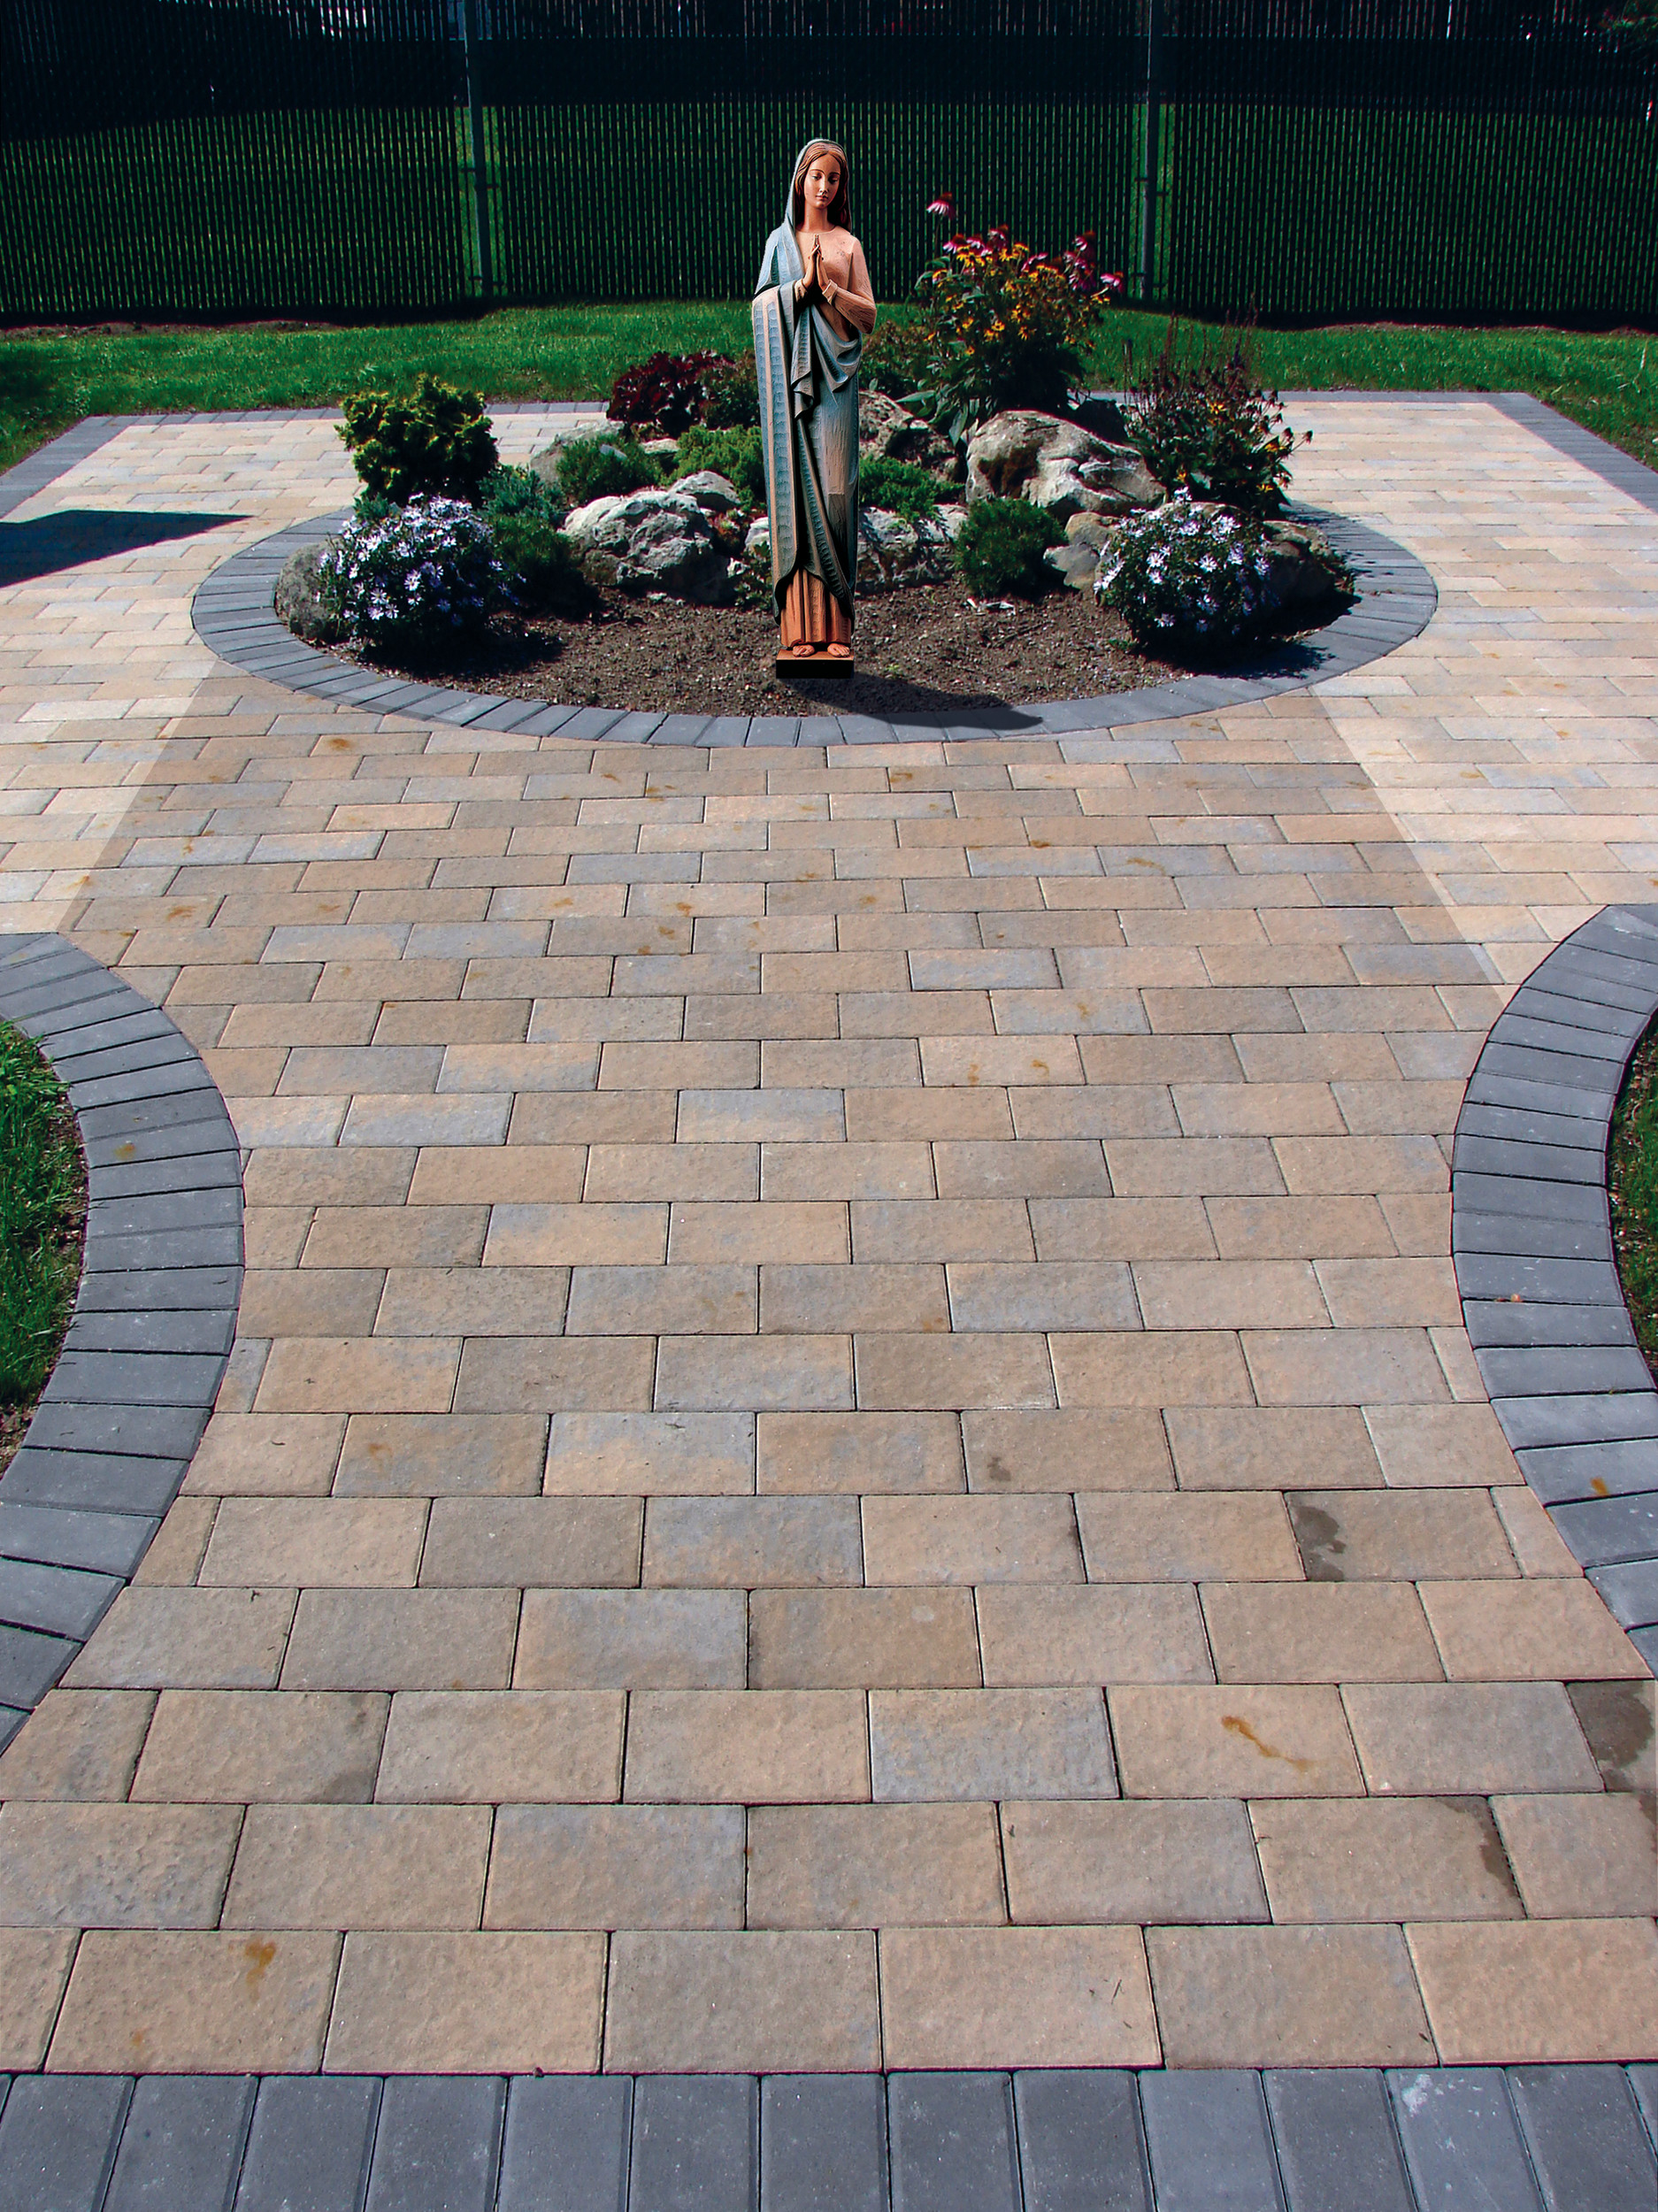 A centennial prayer walkway is being built, and people can purchase bricks and have them inscribed. Above is a rendering of the statue that will adorn its garden.